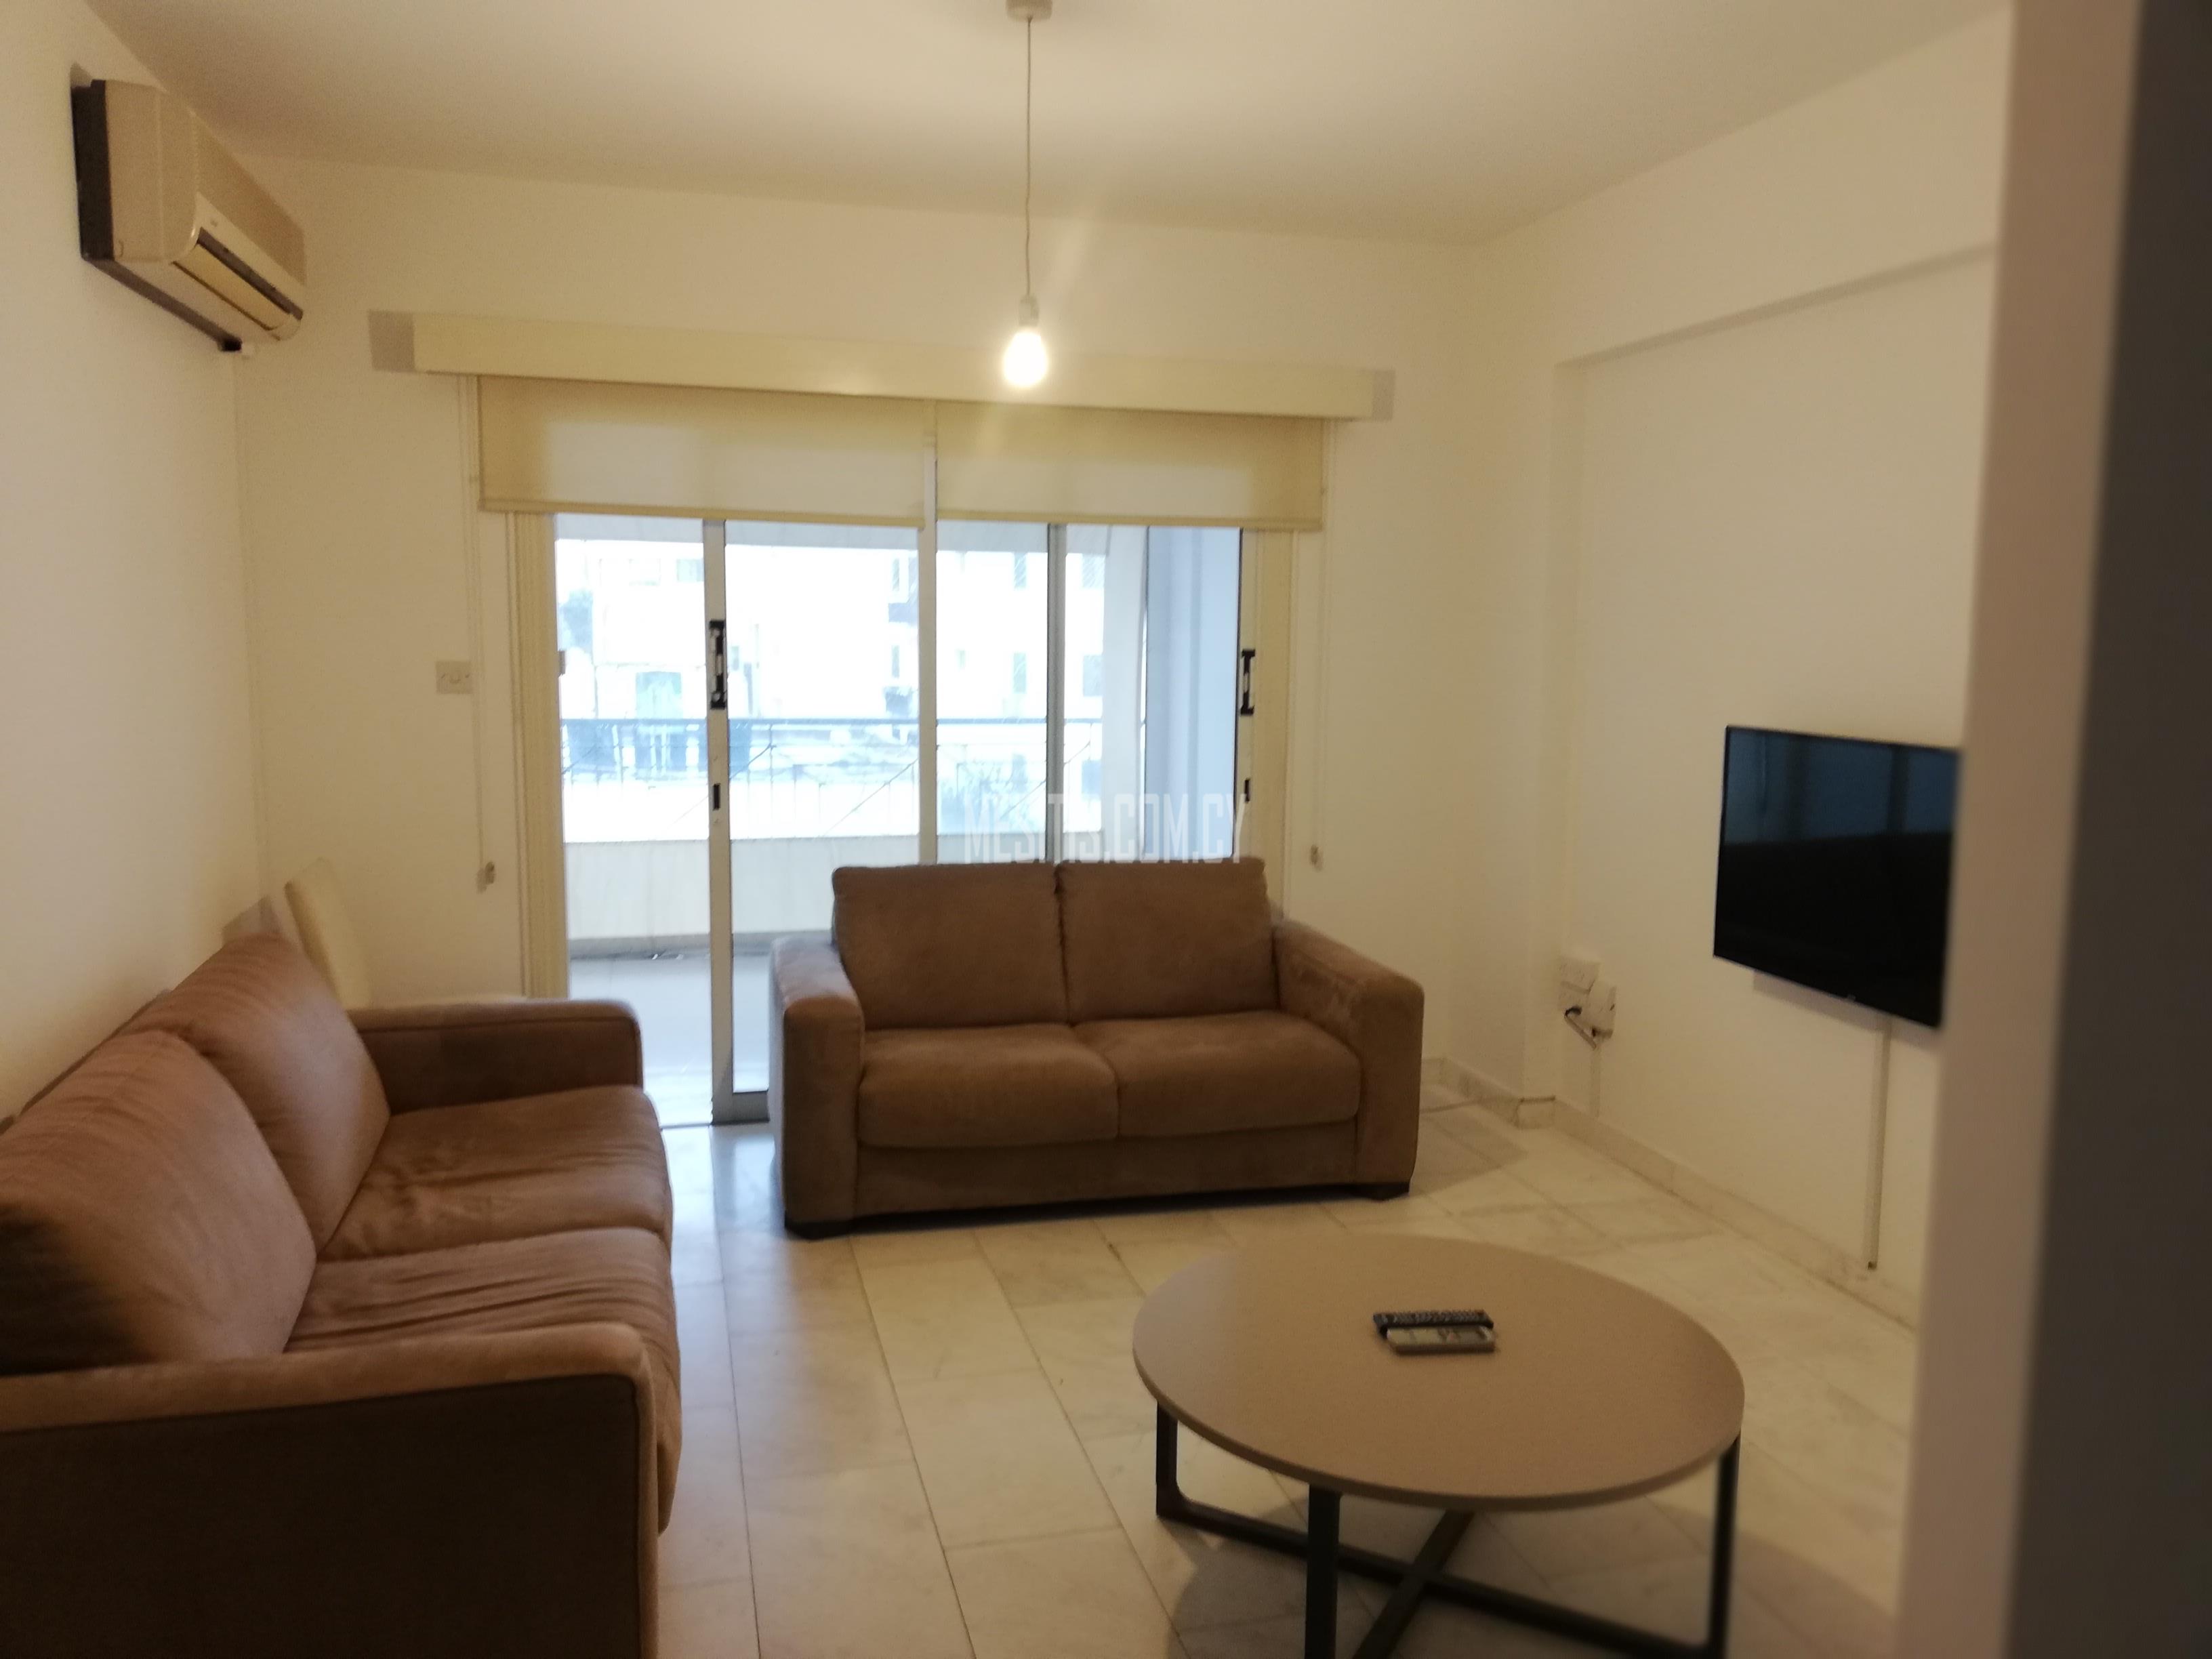 Nice 2 Bedroom Flat For Rent In Strovolos #3567-0